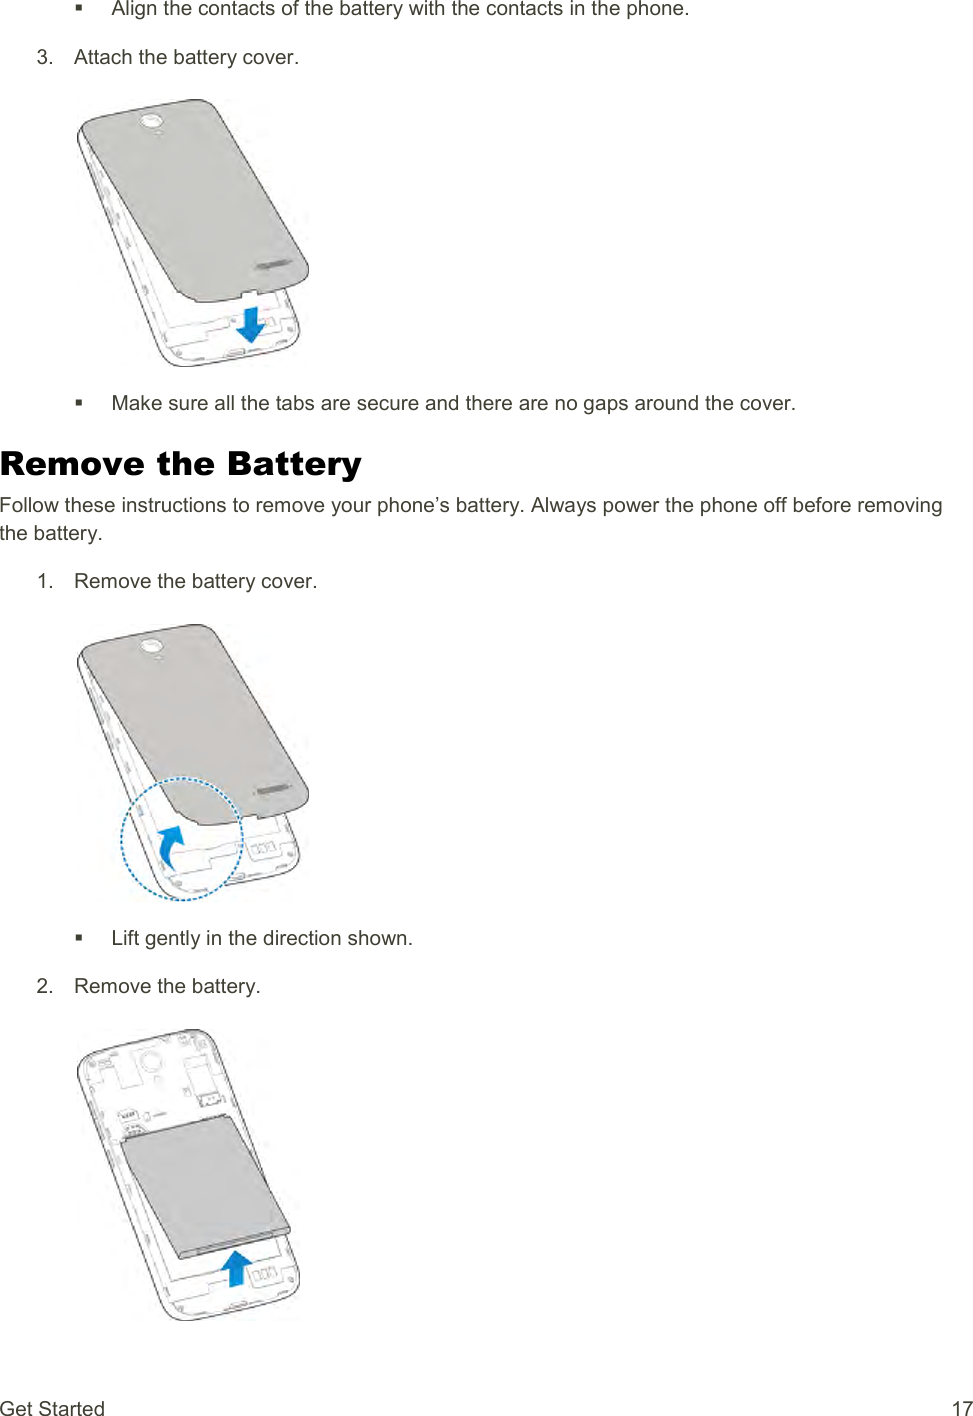 Get Started  17   Align the contacts of the battery with the contacts in the phone. 3.  Attach the battery cover.     Make sure all the tabs are secure and there are no gaps around the cover. Remove the Battery Follow these instructions to remove your phone’s battery. Always power the phone off before removing the battery. 1.  Remove the battery cover.     Lift gently in the direction shown. 2.  Remove the battery.   